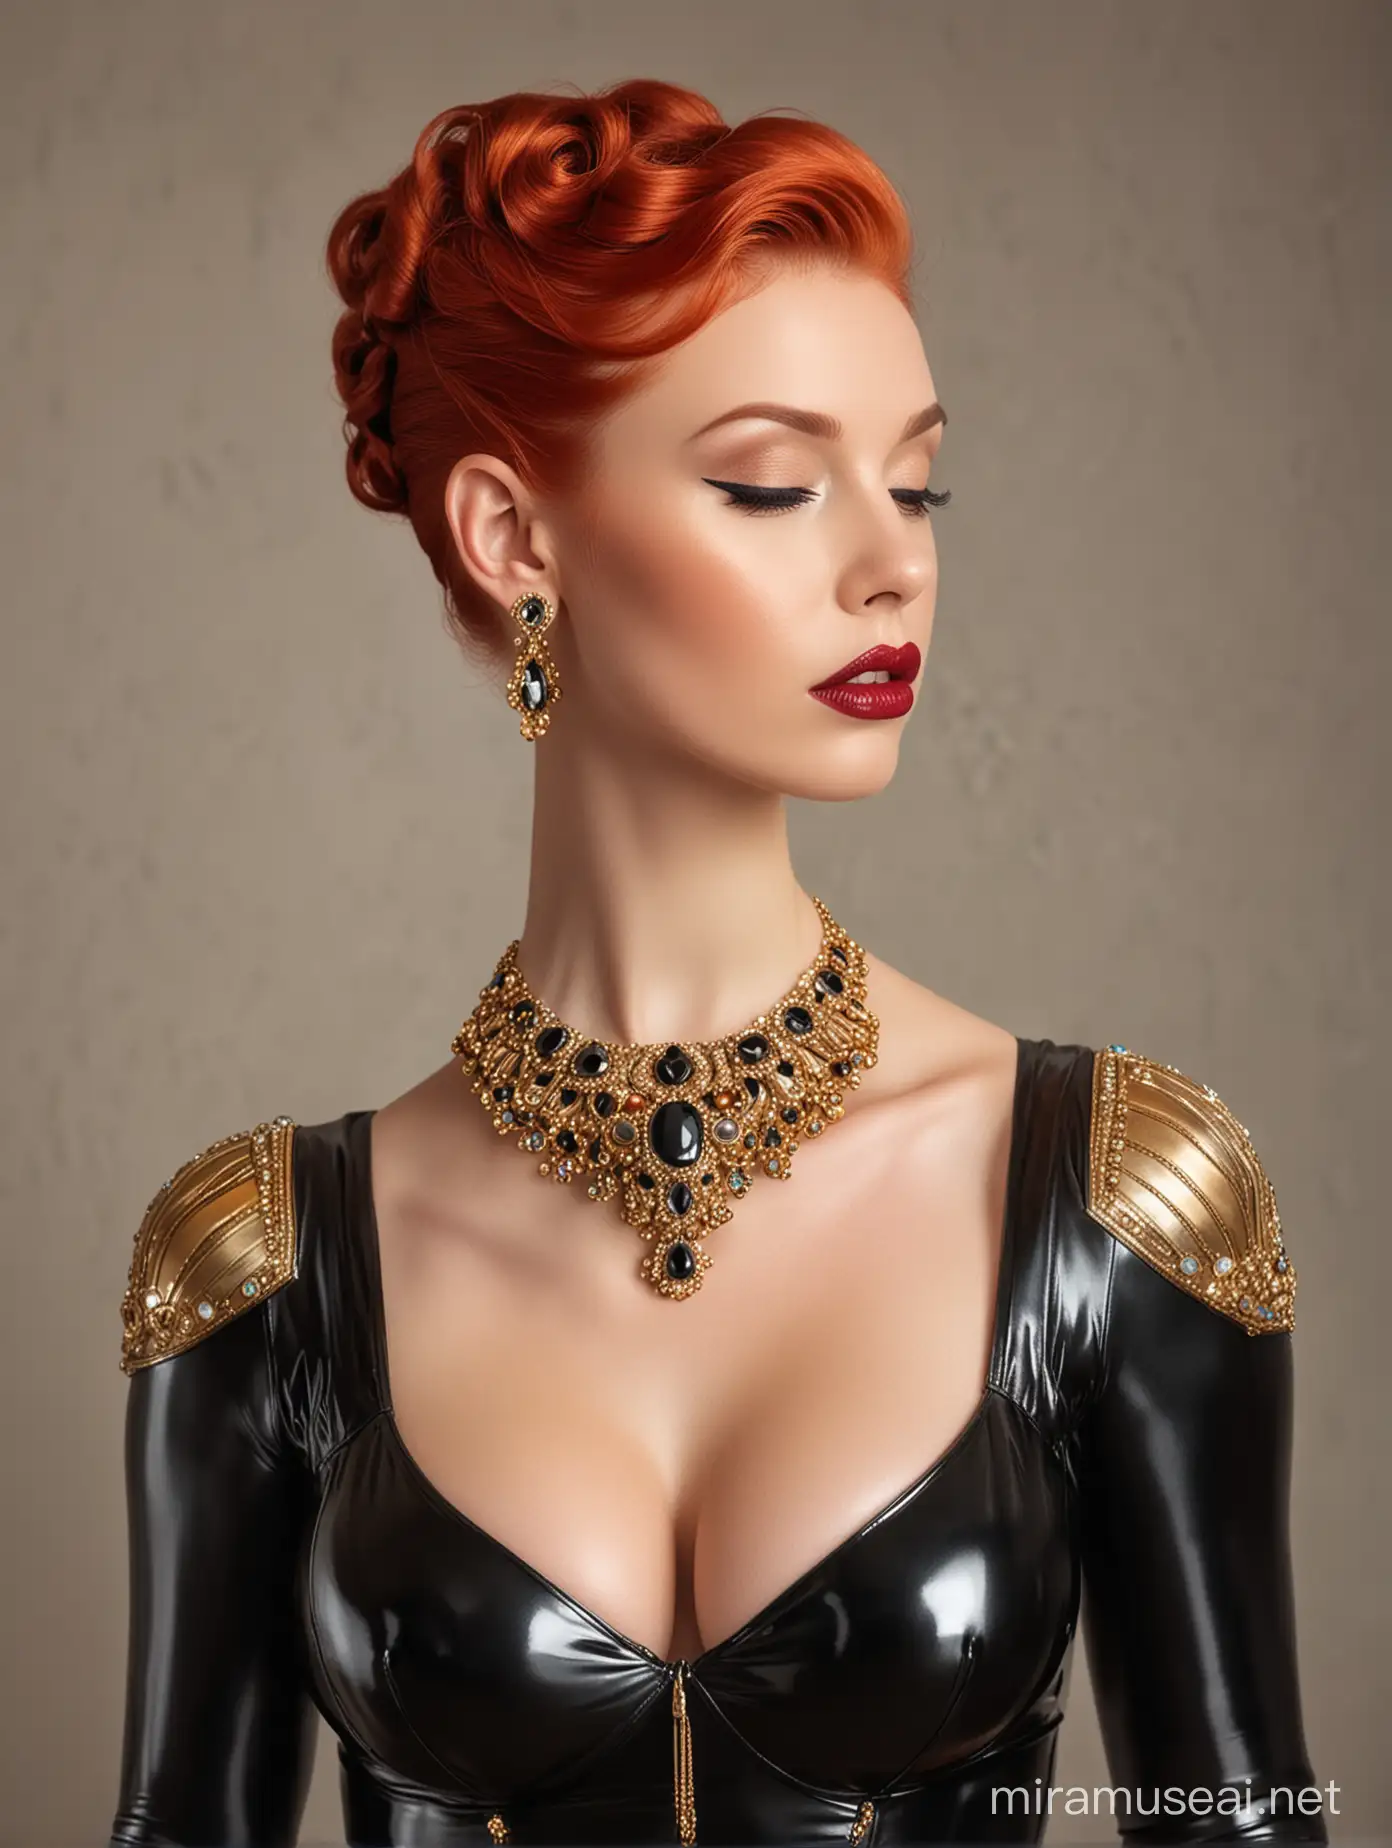 A beautiful lady with candyred hair in an updo.  The hair is in an artdeco style updo. The lady wears a shiny black latex catsuit and has large breasts.  She wears golden jewelry full of gemstones. 